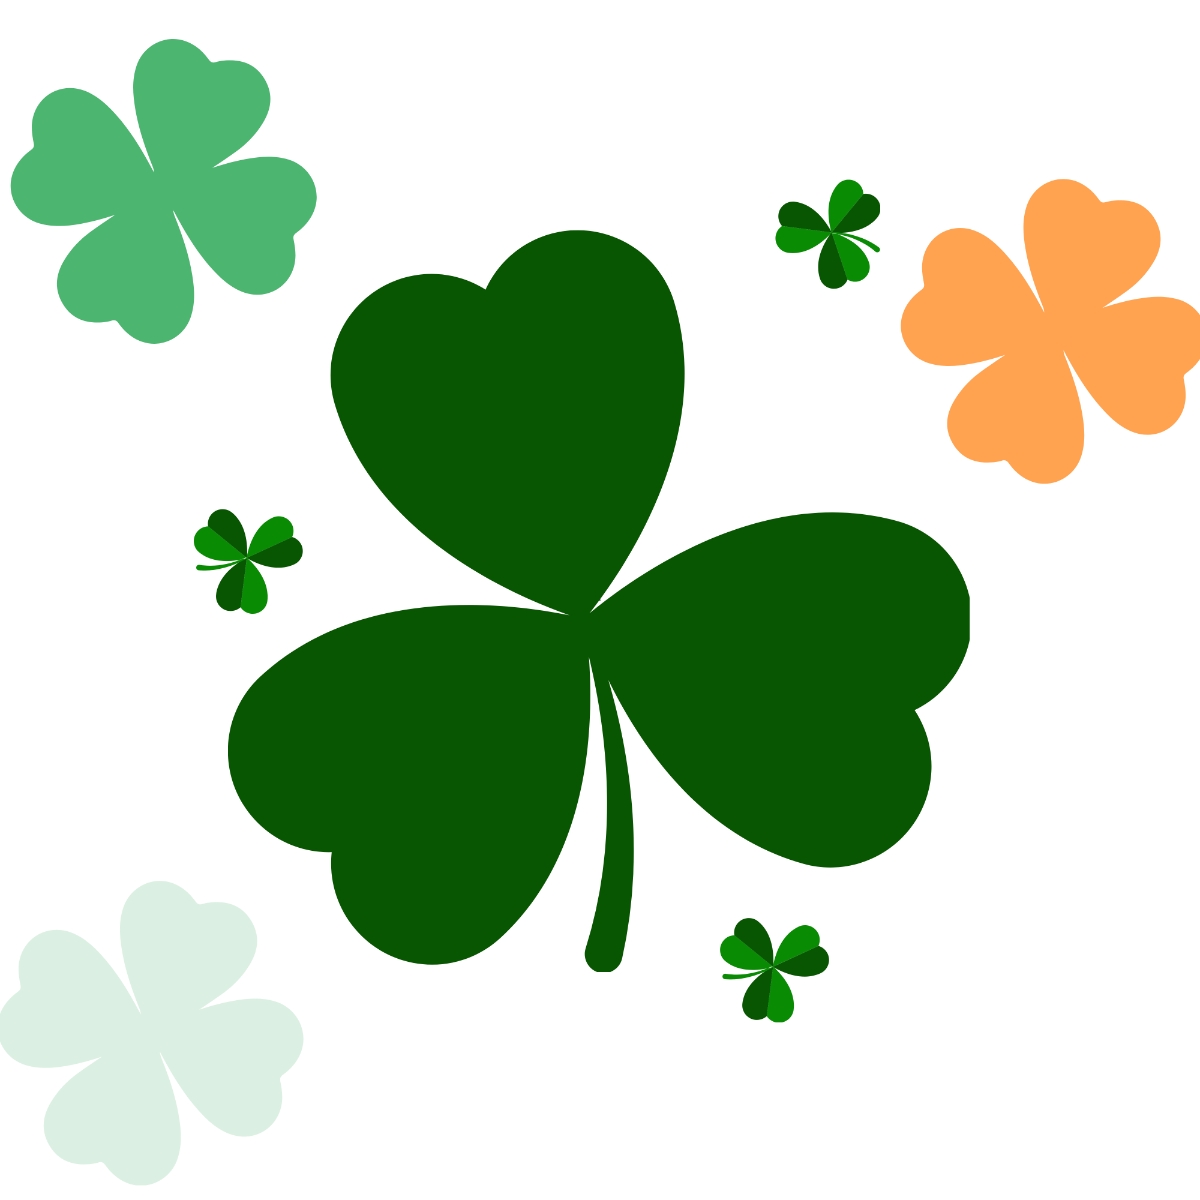 St. Patrick's Day Clove Vector Template